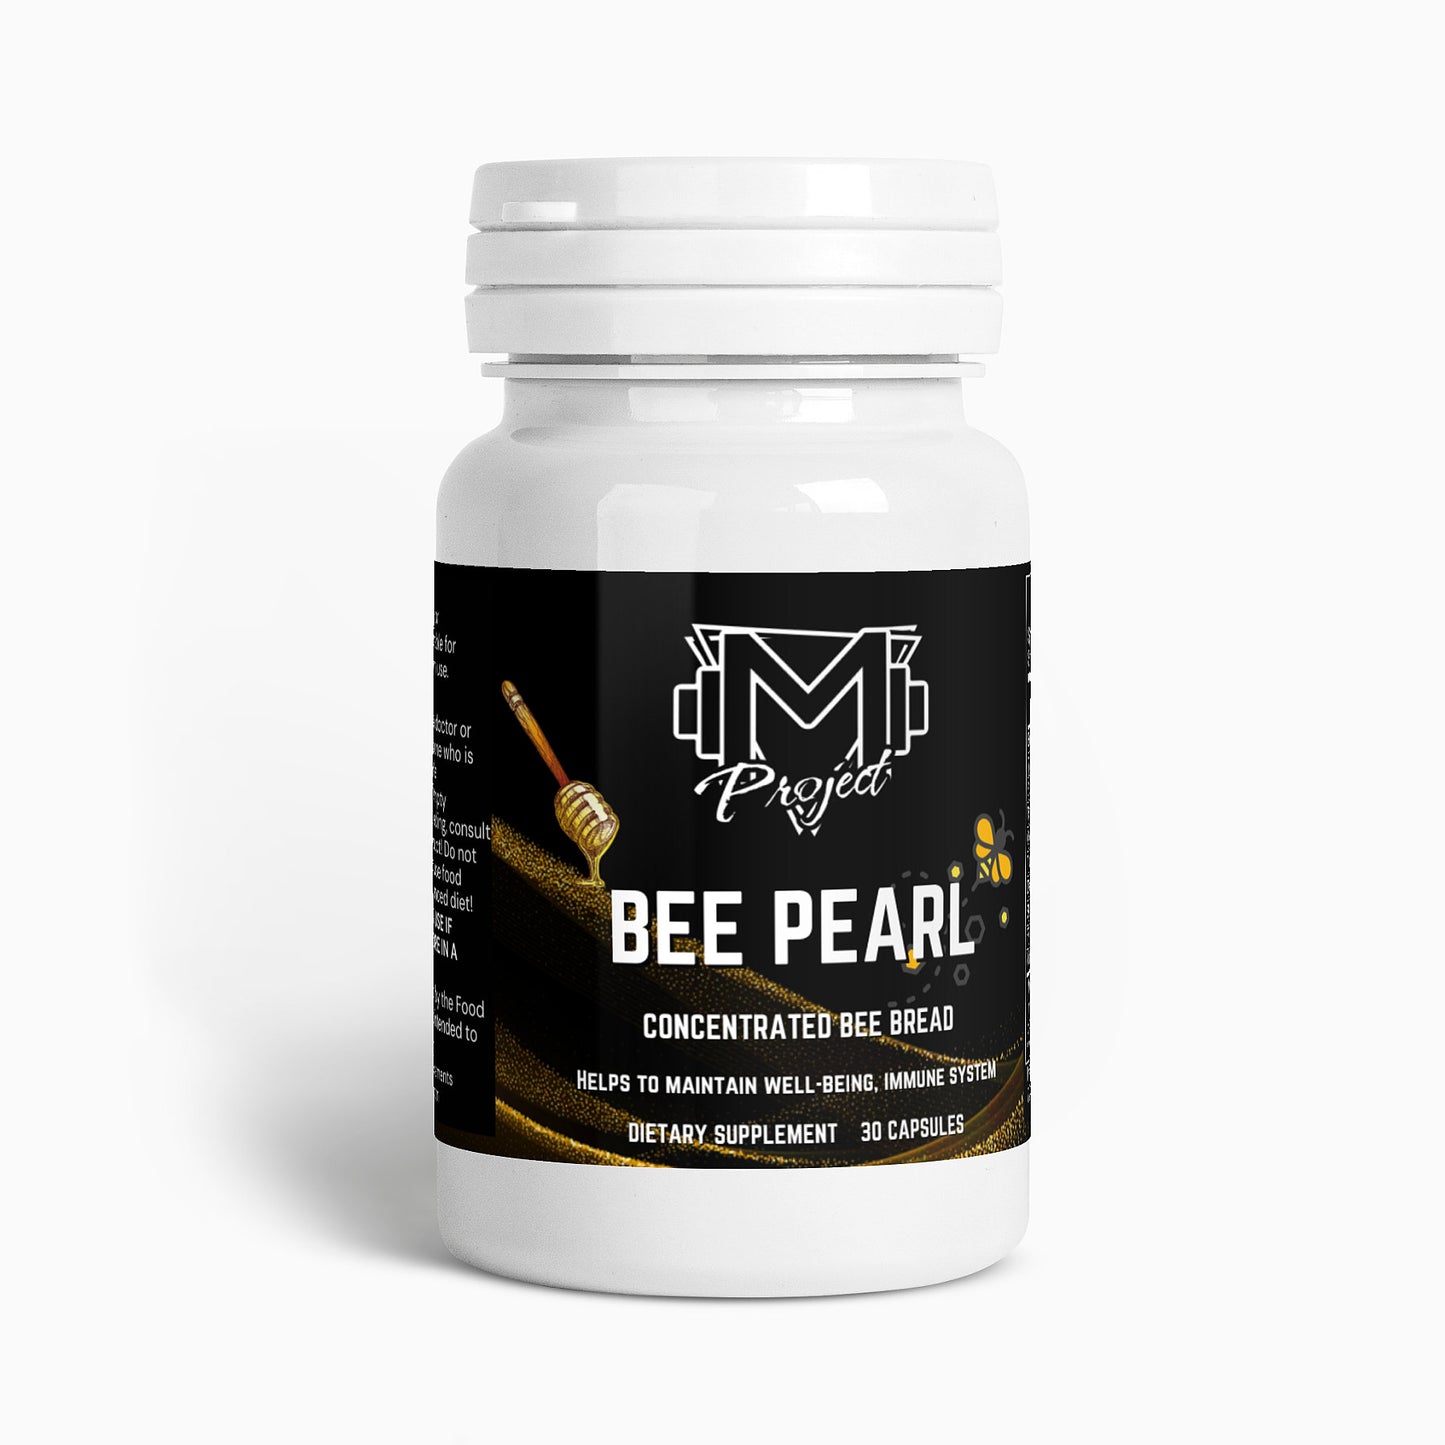 Bee Pearl Capsules by Project M